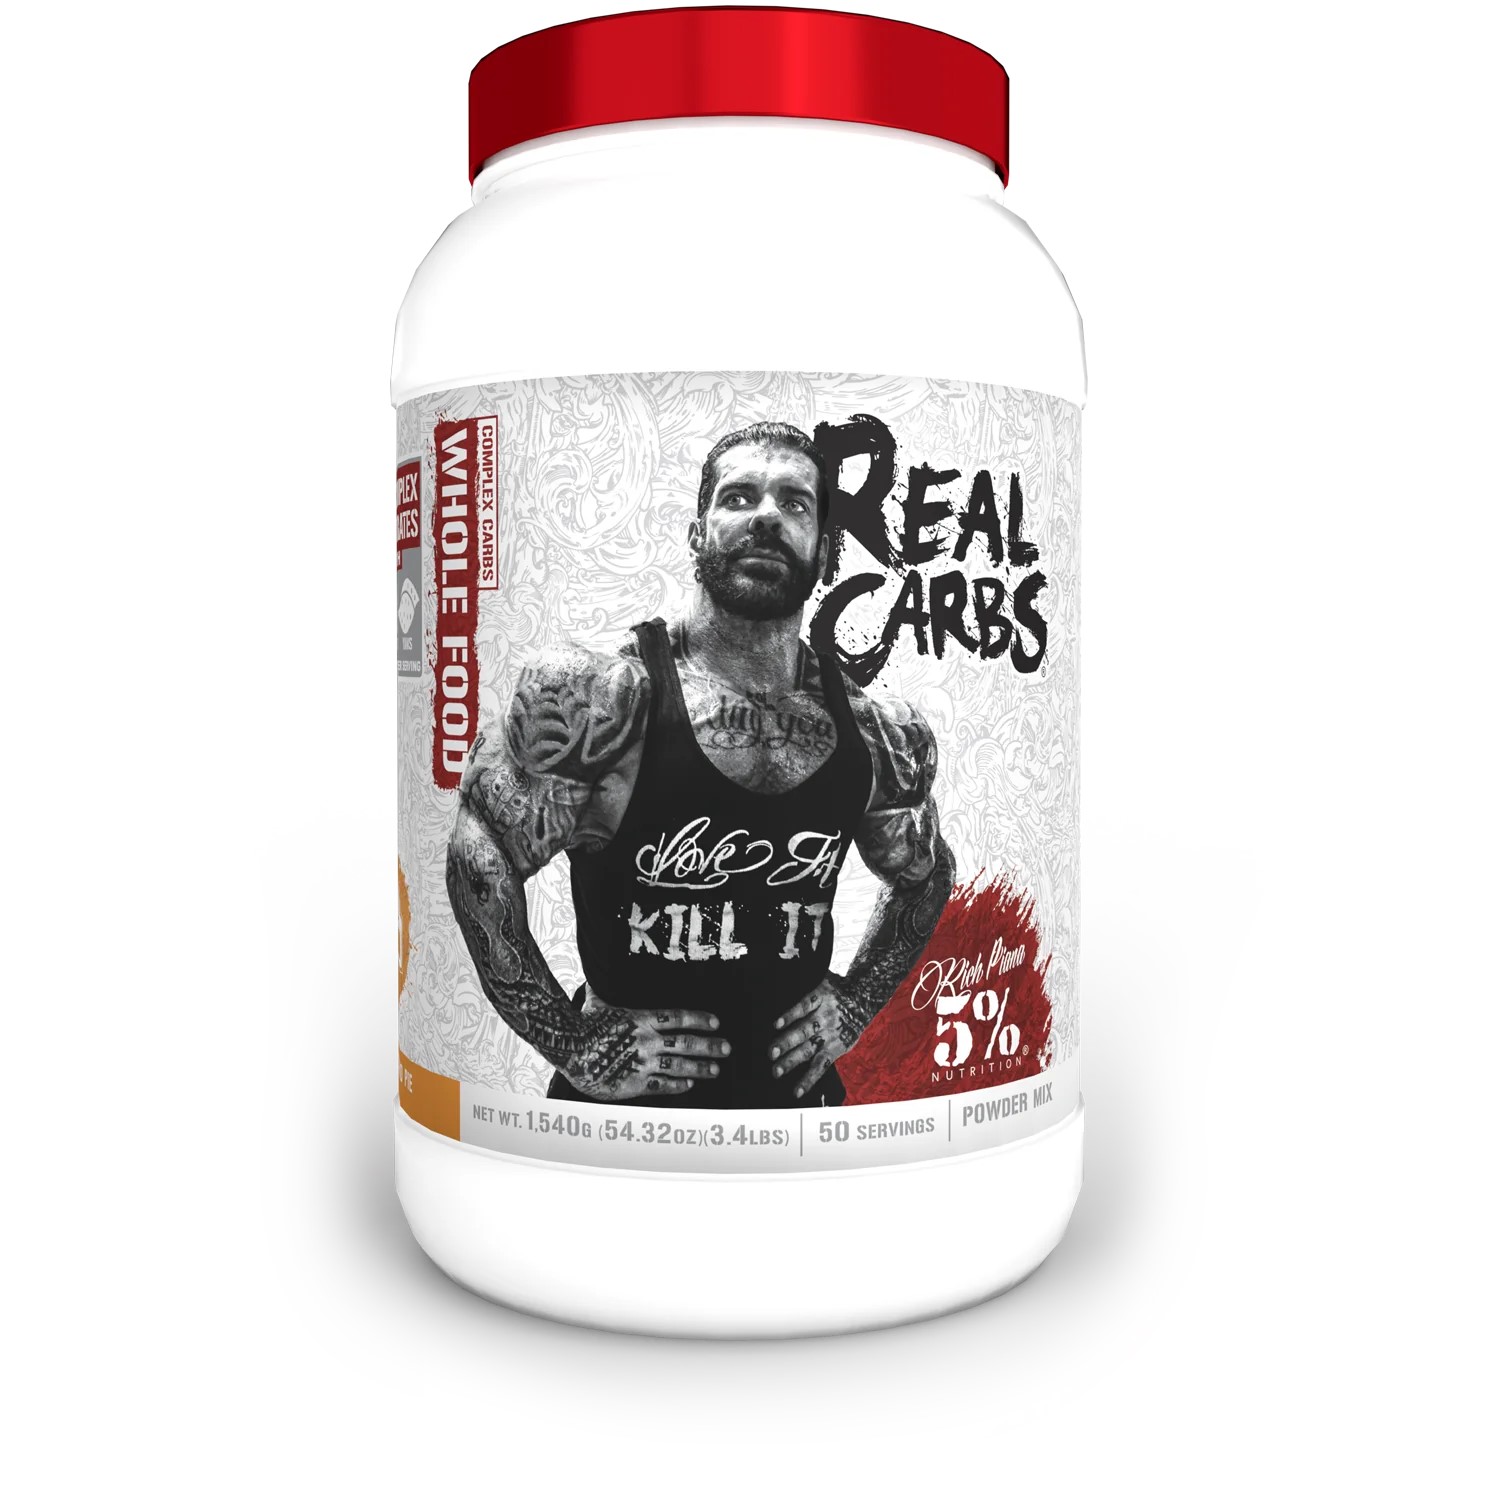 real-carbs-complex-carbohydrates-legendary-series-5percent-nutrition-4